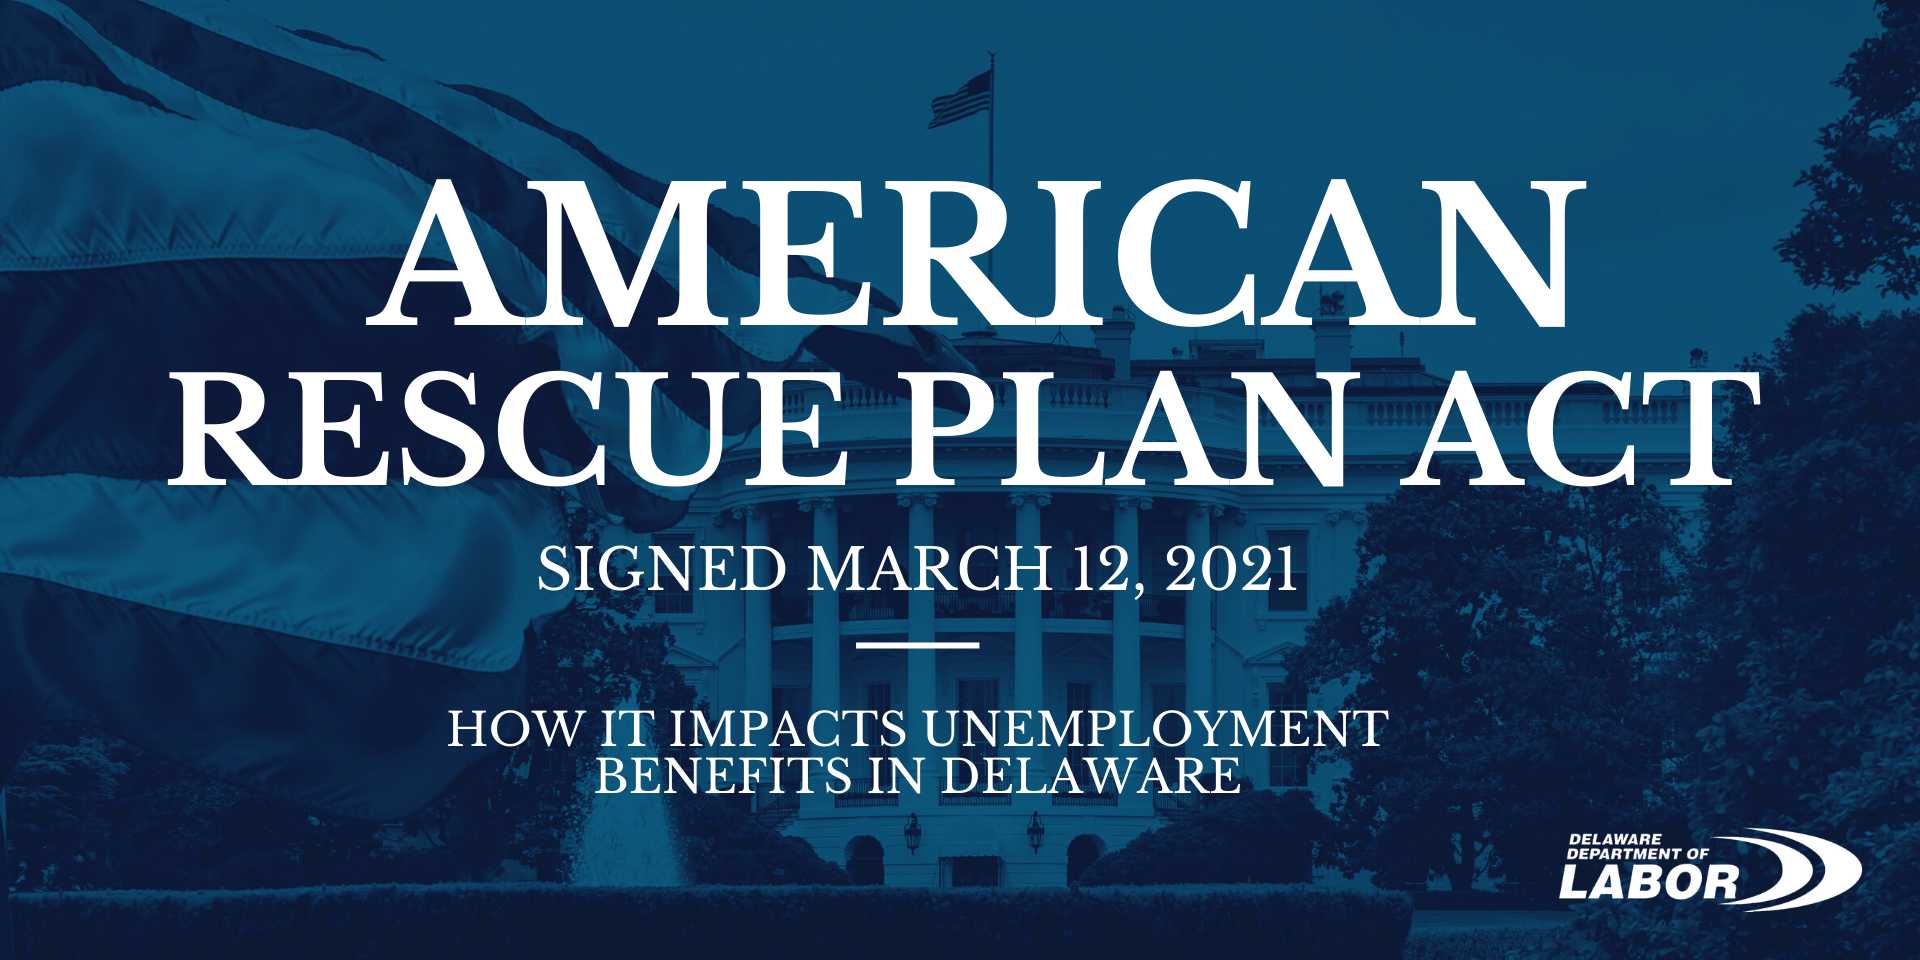 The American Rescue Plan Act Delaware Department of Labor